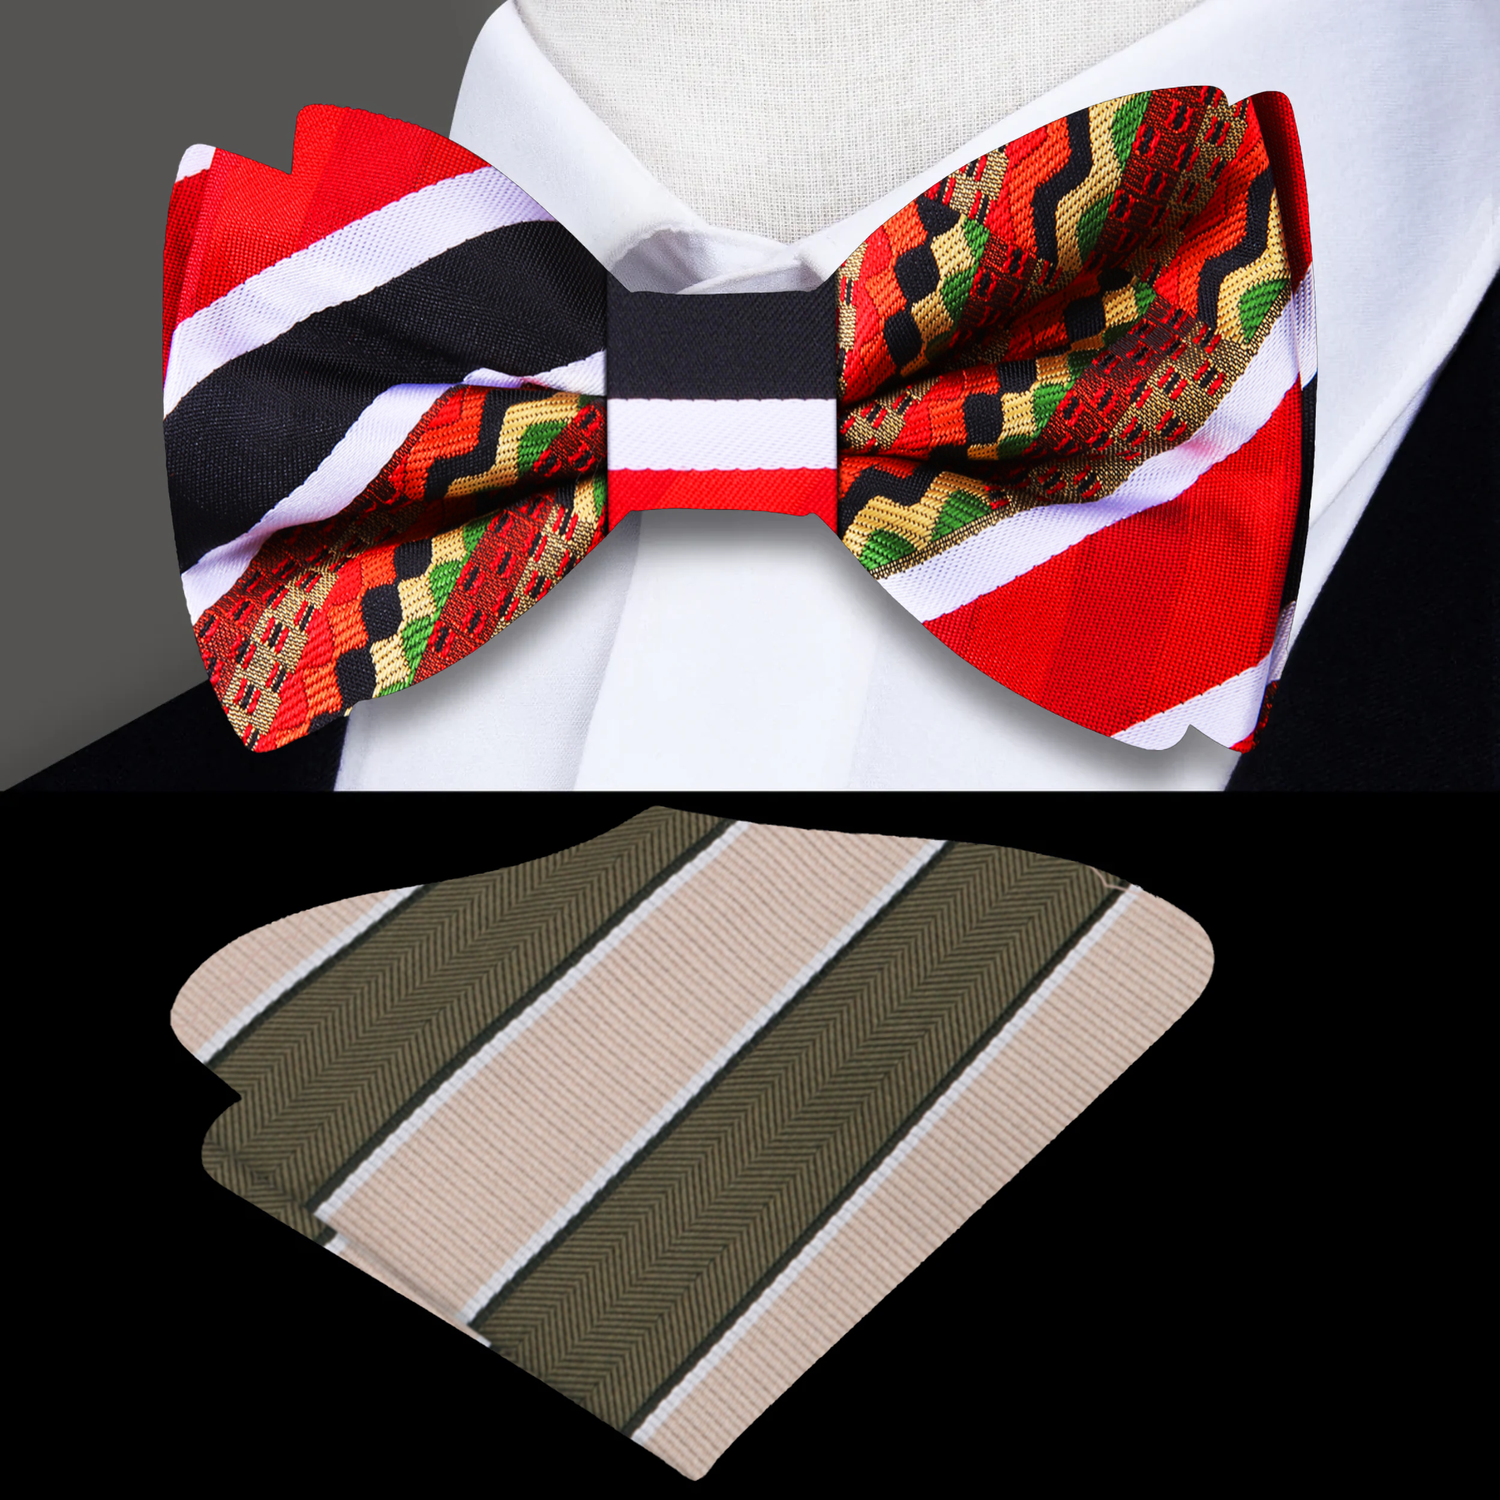 A Red, Black, White, Light Gold, Green, Brown Color Abstract Pattern Silk Bow Tie, Accenting Pocket Square